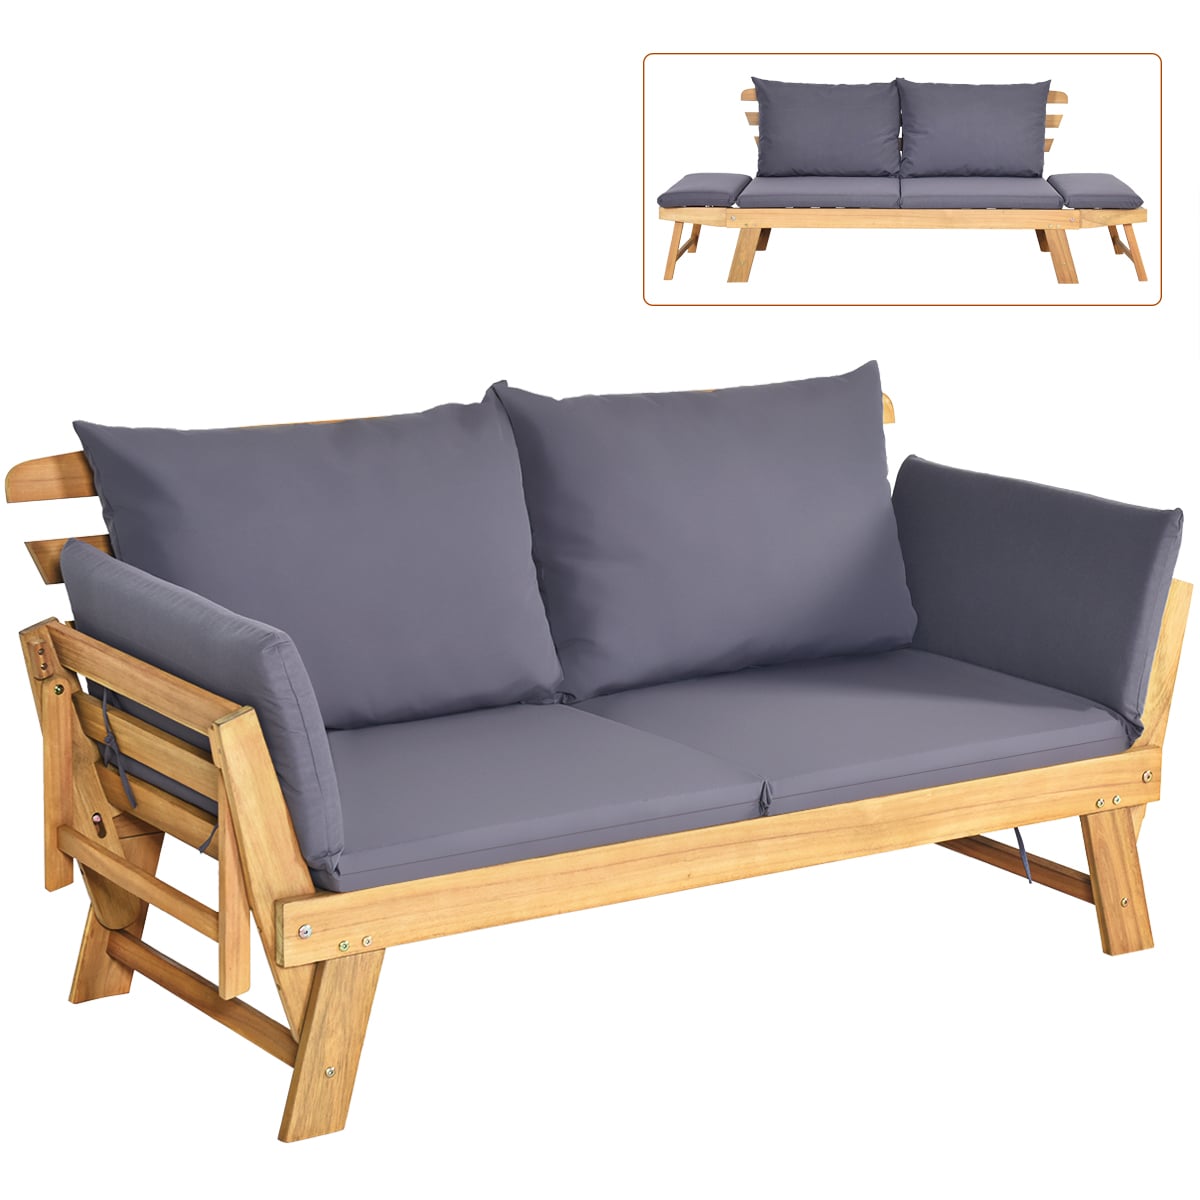 lid marge verraad Goplus Rattan Outdoor Daybed with Gray Cushion(S) and Acacia Frame in the  Patio Sectionals & Sofas department at Lowes.com